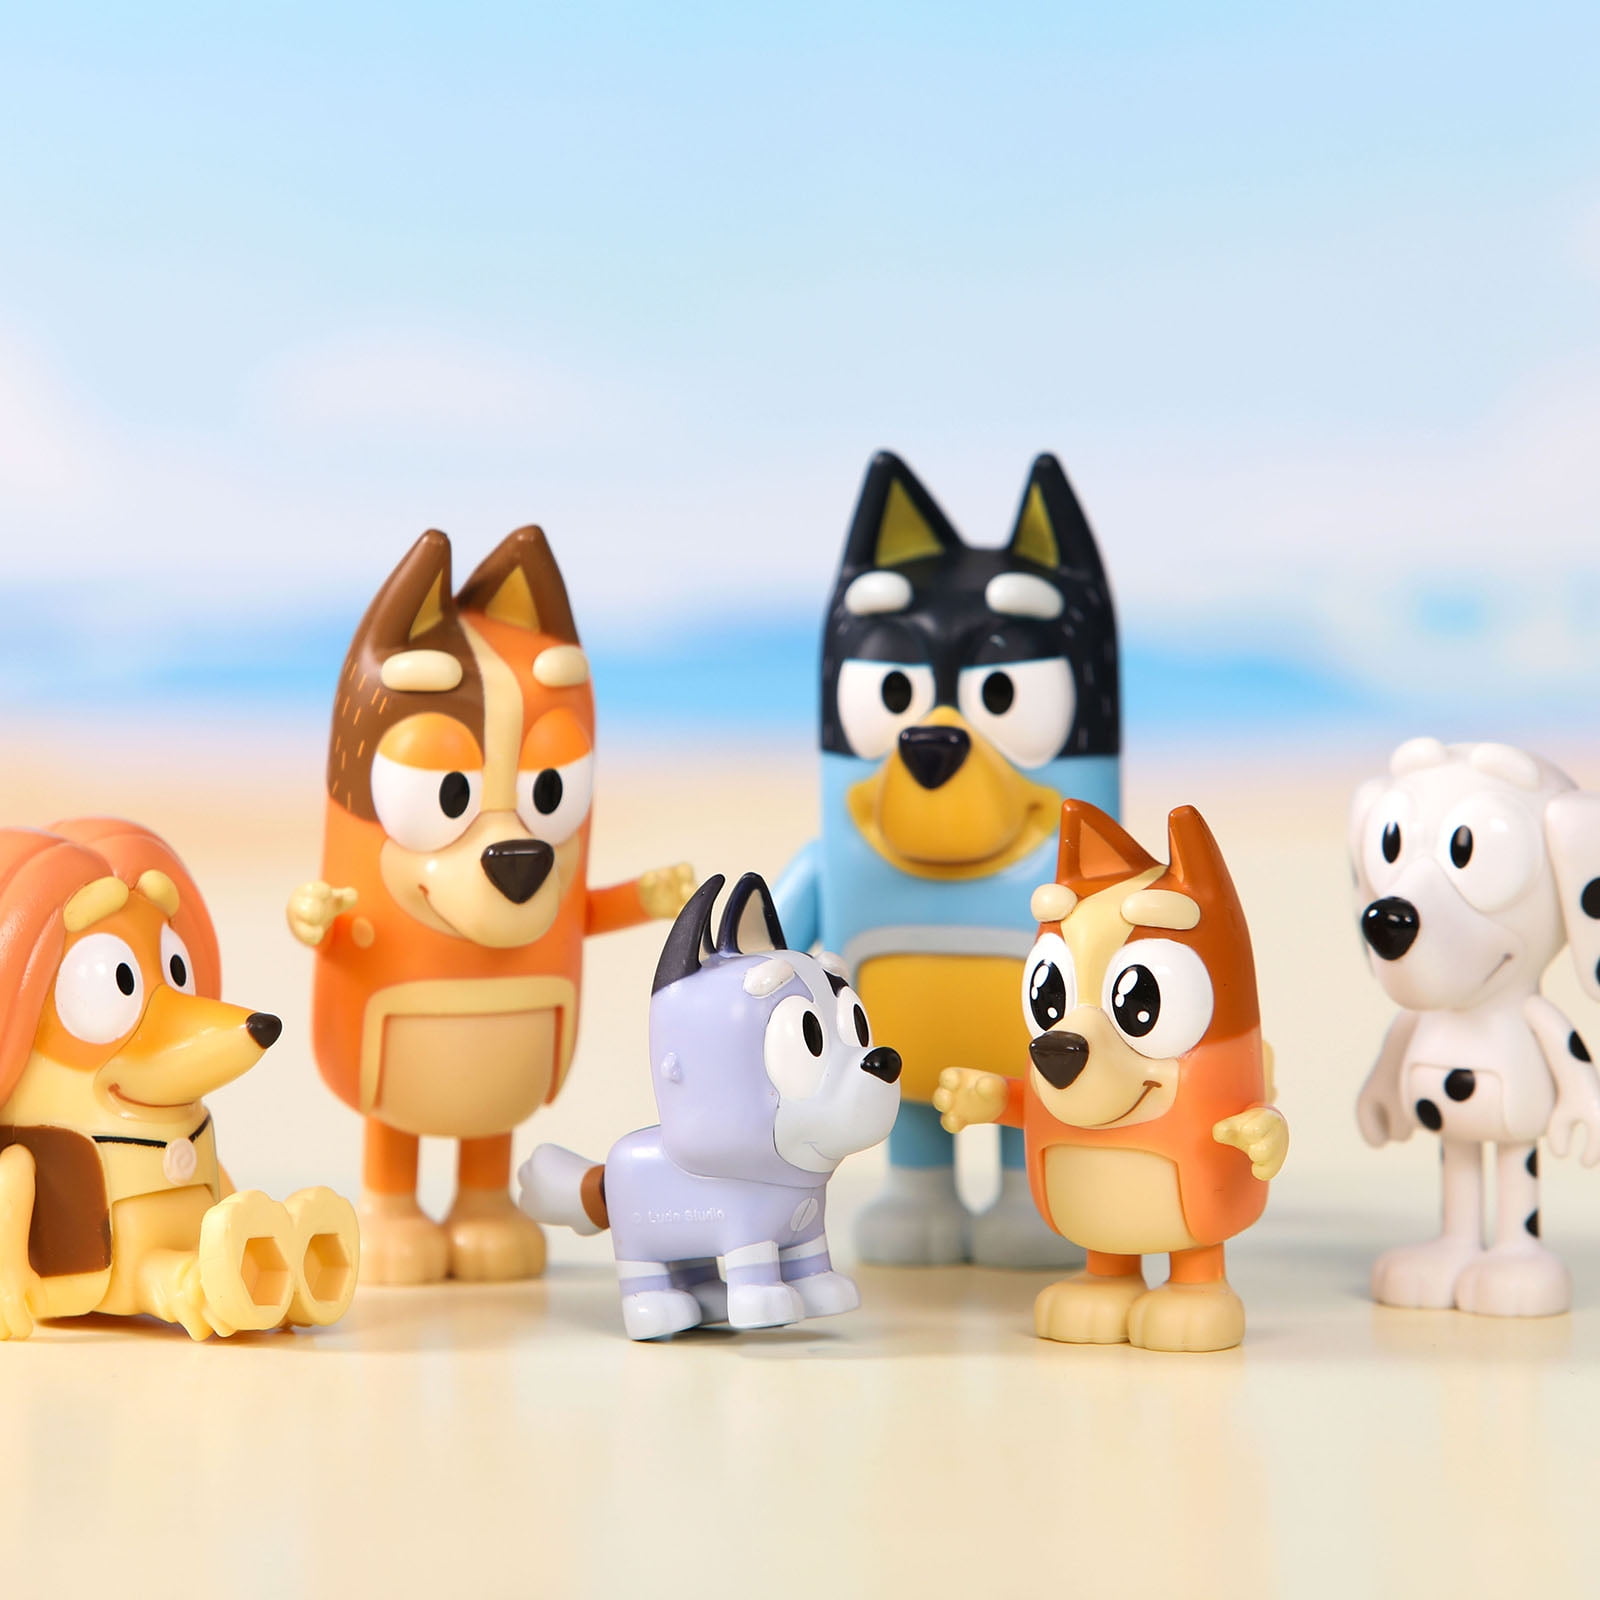 8 PCS Wolfs-Bluey Figures Toys Playset, Wolves-Bluey Action Figurines  Family and Friends Set; Bingo, Bandit, Chilli, Coco, Snickers, Rusty and  Muffin